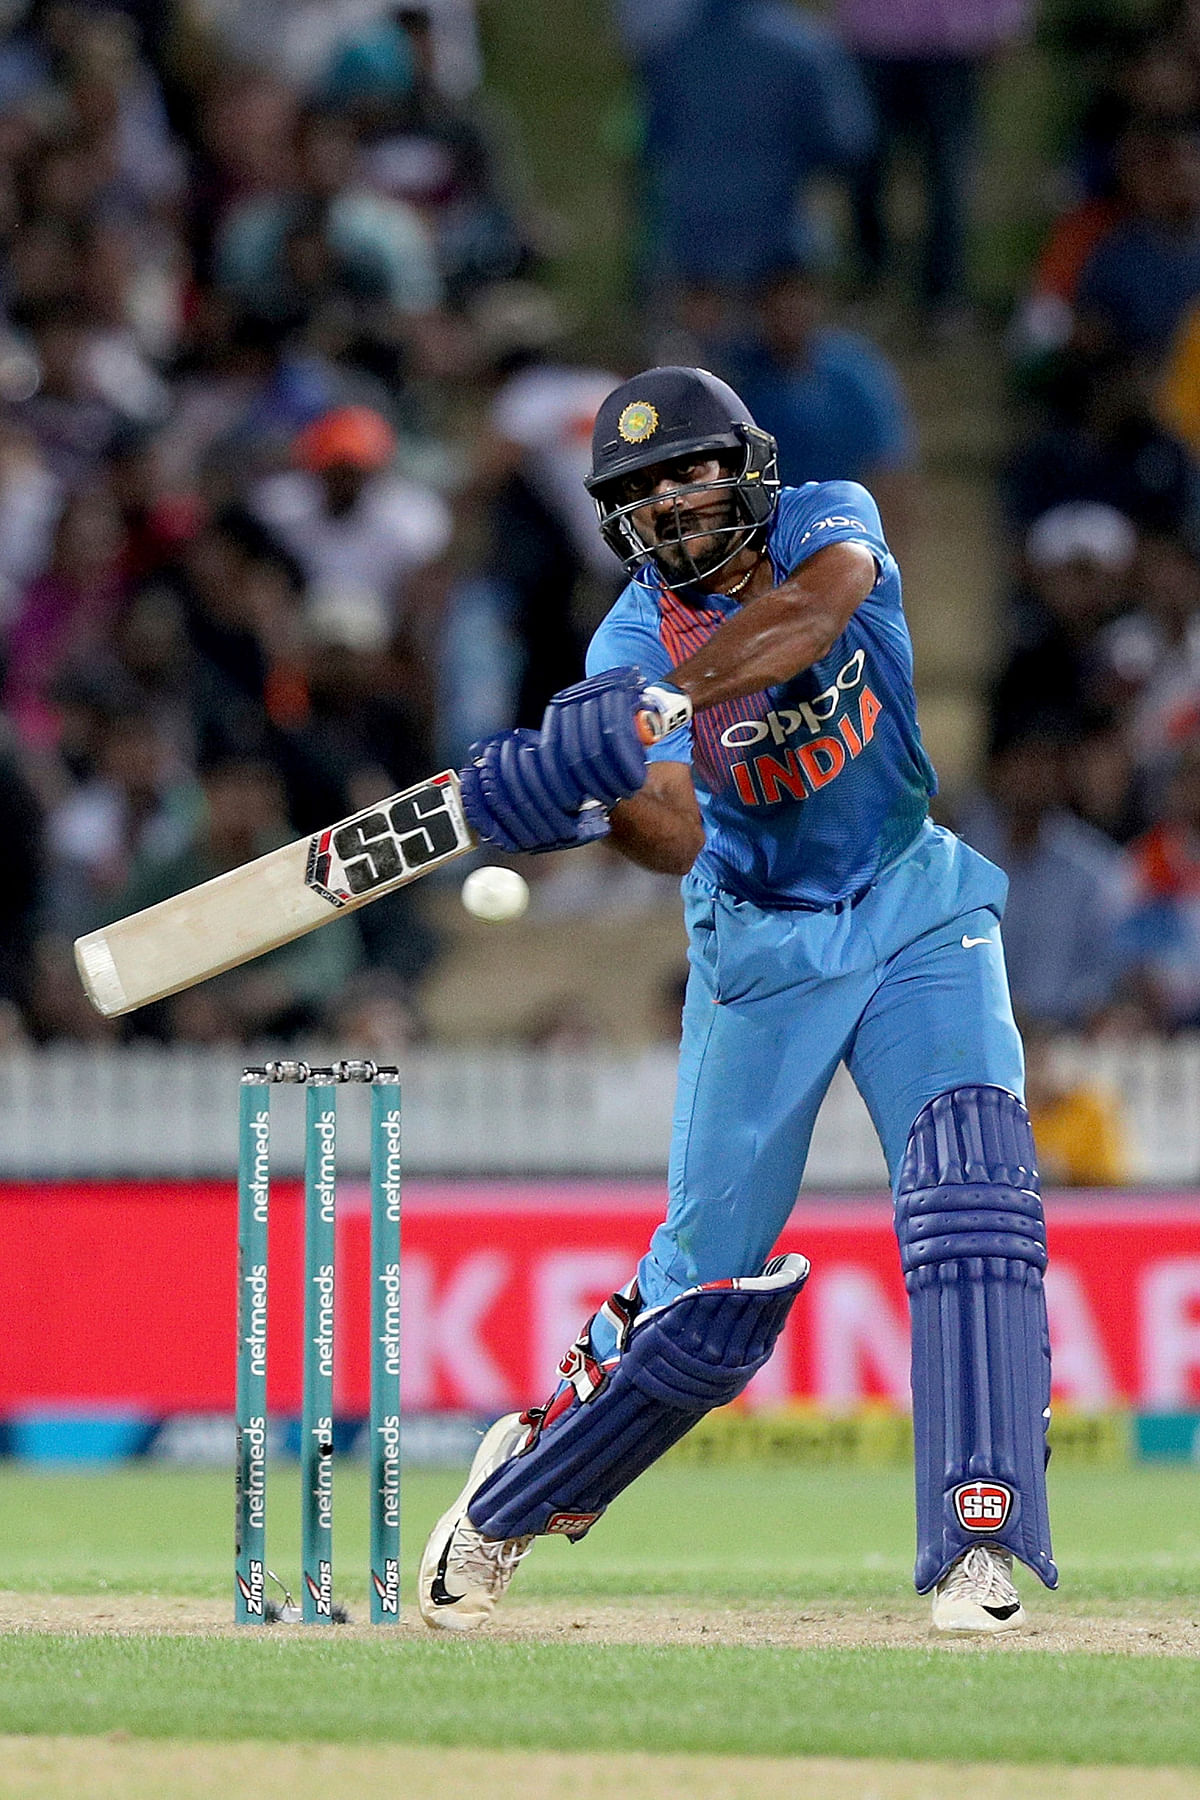 It’s India’s final assignment ahead of the ICC World Cup 2019 – and spots remain up for grabs in the 15-man roster.